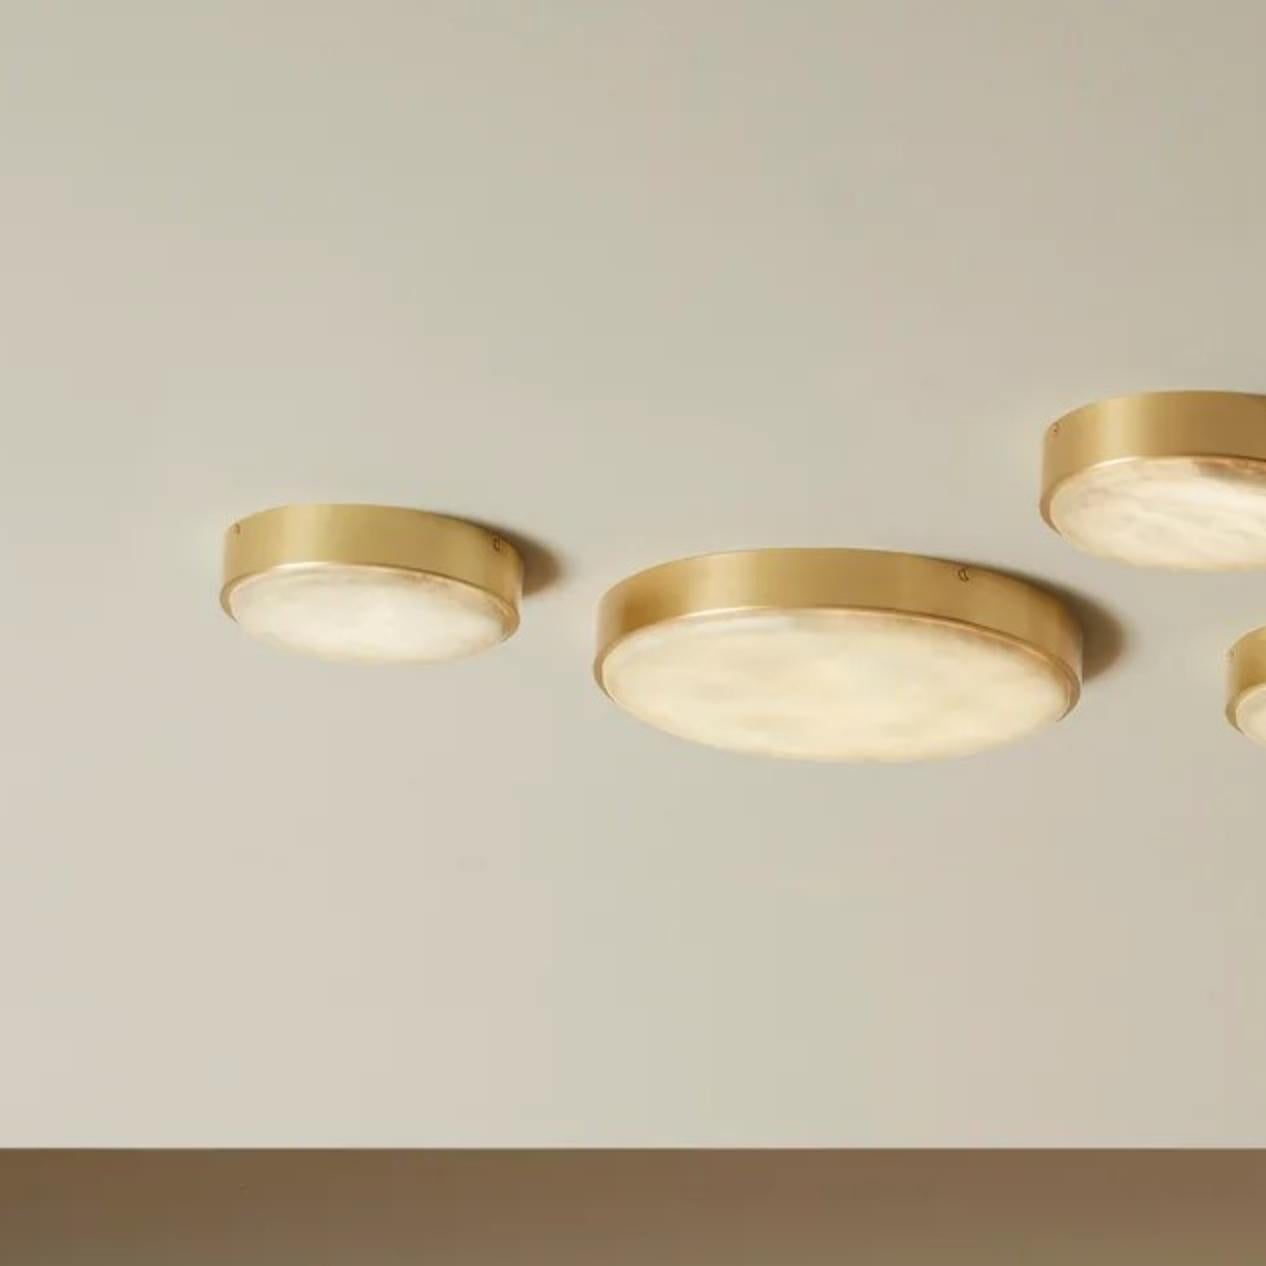 Anvers Large Wall/Ceiling lamp by CTO Lighting
Materials: satin brass with alabaster stone
Also available in bronze with alabaster stone
Dimensions: H 4.8 x W 54.5 cm 

All our lamps can be wired according to each country. If sold to the USA it will